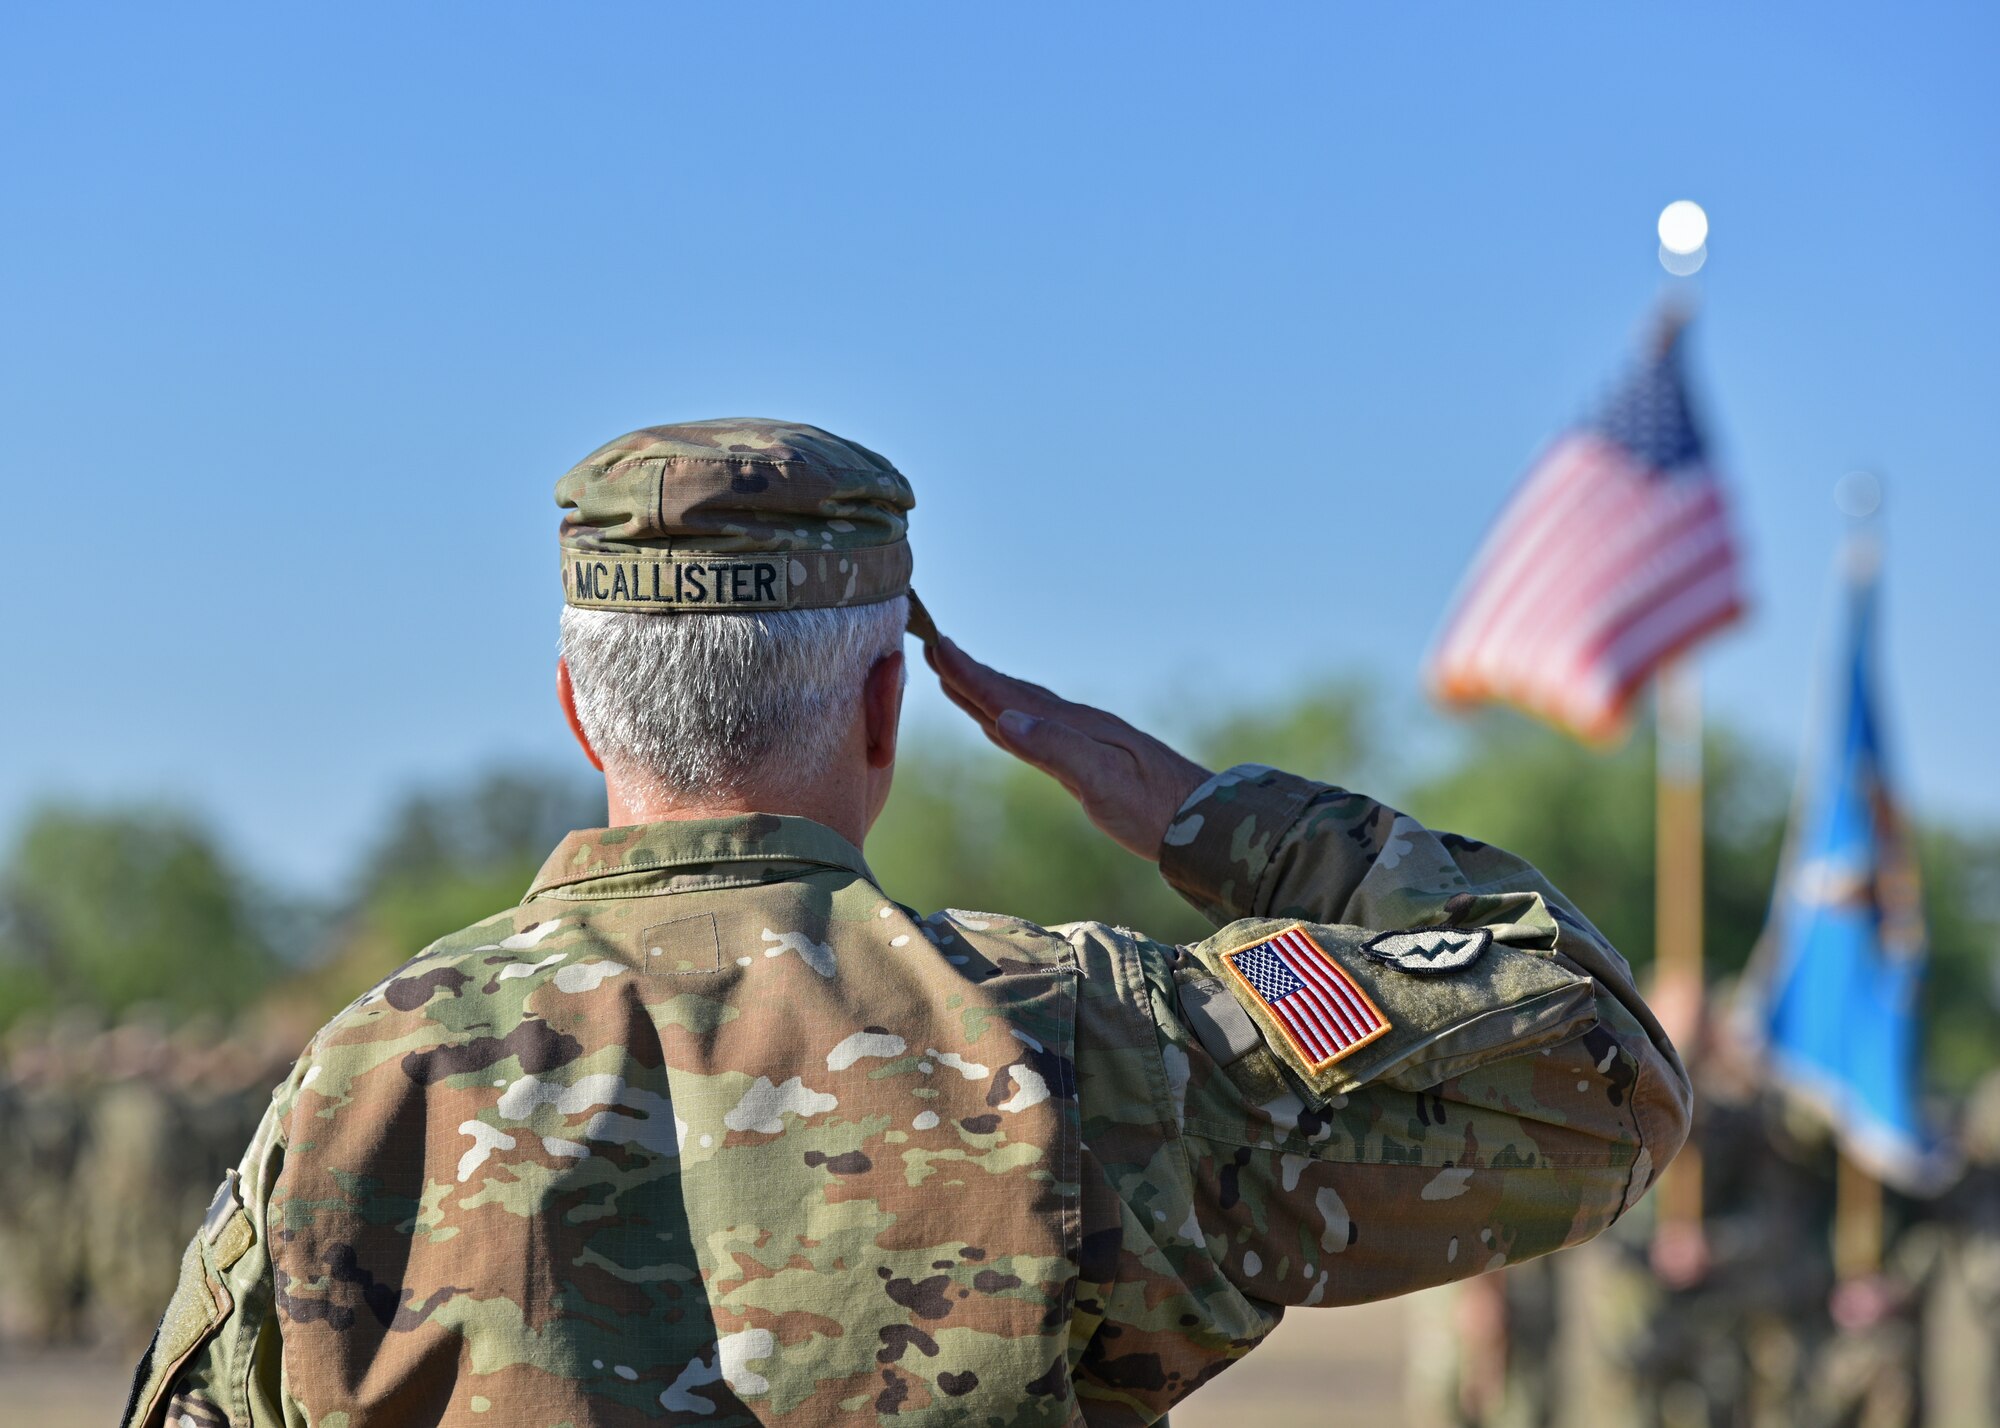 U.S. Army Lt. Col. John McAllister, incoming 344th Military Intelligence Battalion commander, salutes the flag during the 344th MI BN change of command ceremony at Fort Concho, San Angelo, Texas, June 21, 2022. McAllister was previously stationed at Fort Hood, Texas. (U.S. Air Force photo by Senior Airman Ashley Thrash)